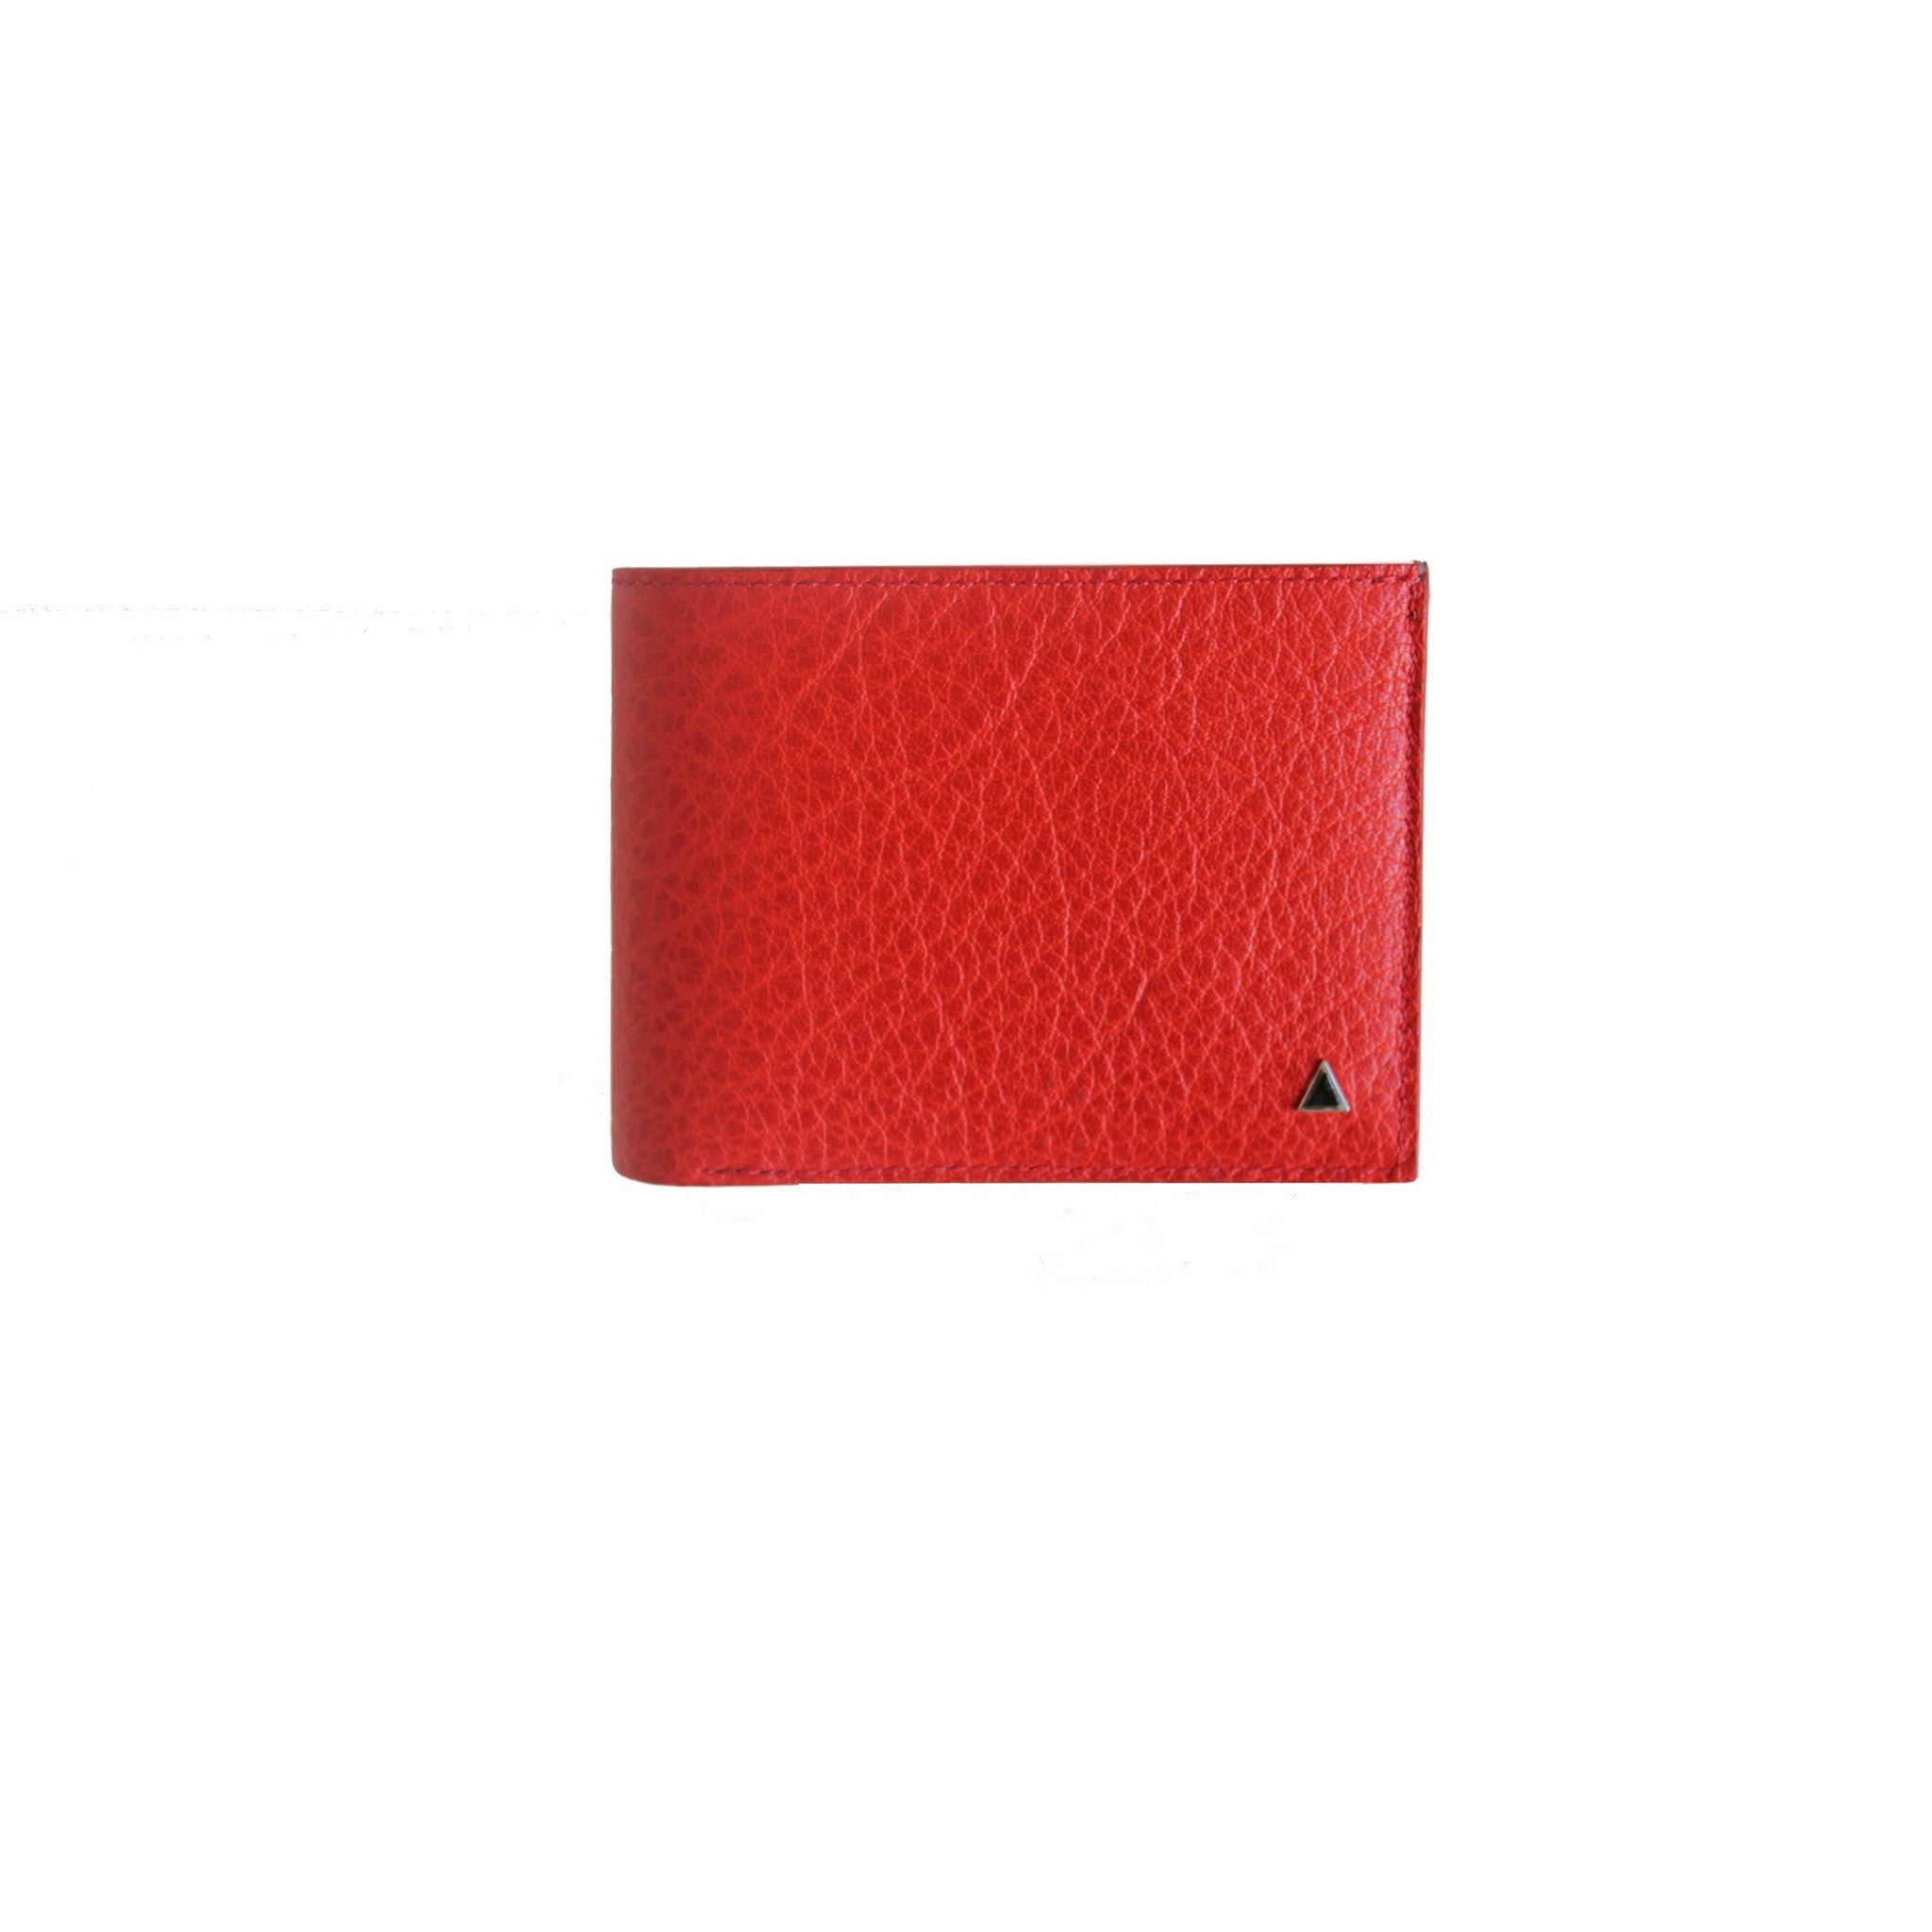 Made in FRANCE Gambetta Luxury Wallet in Red Buffalo by Anonyme Paris - La  Perfection Louis